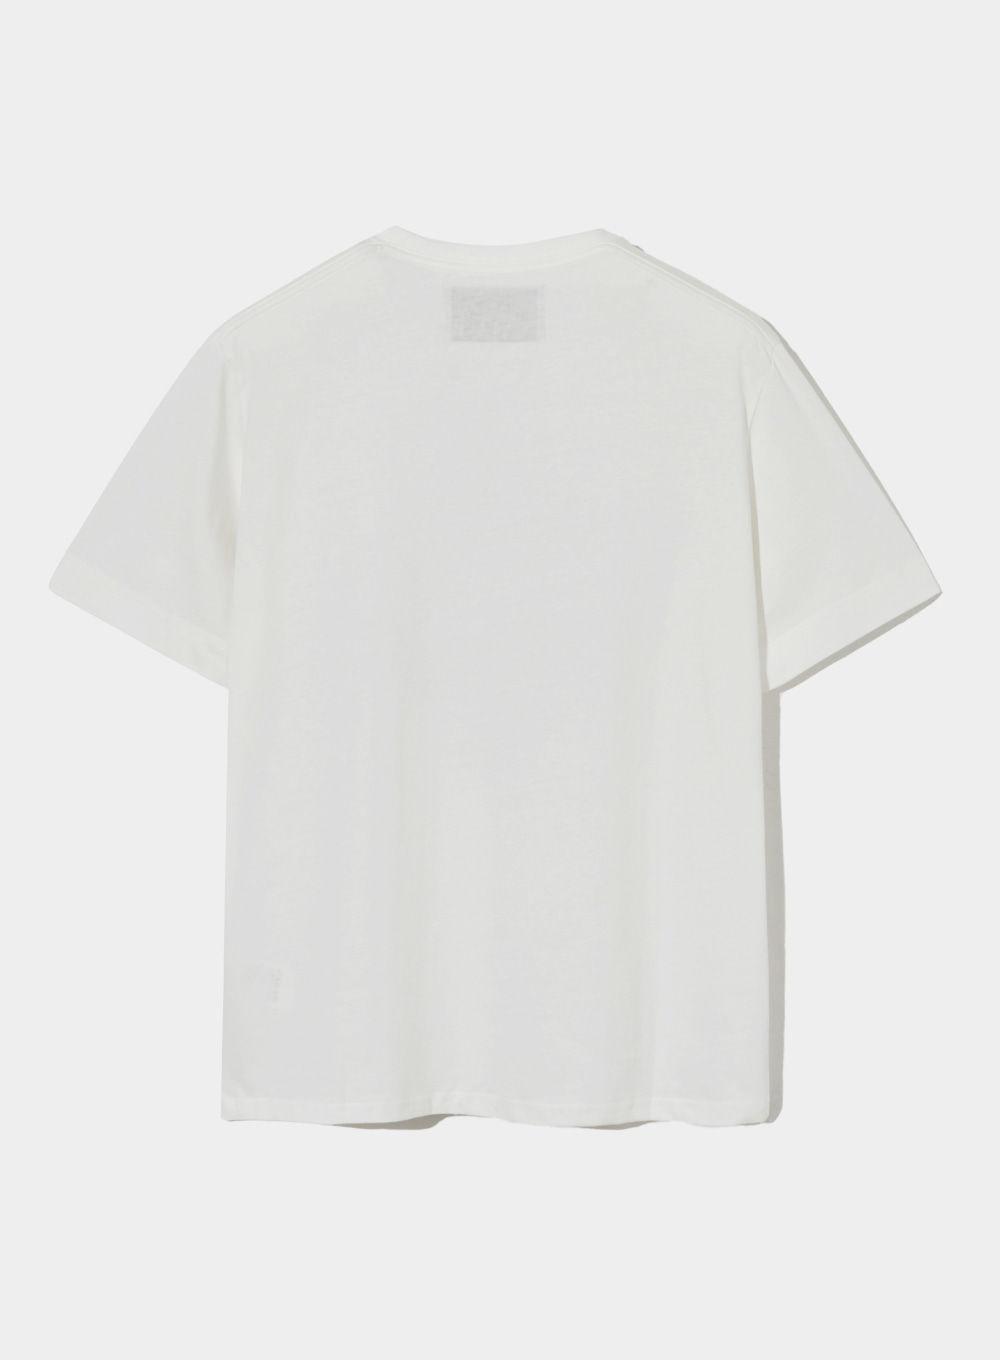 House Of Satur Graphic T-Shirts - White